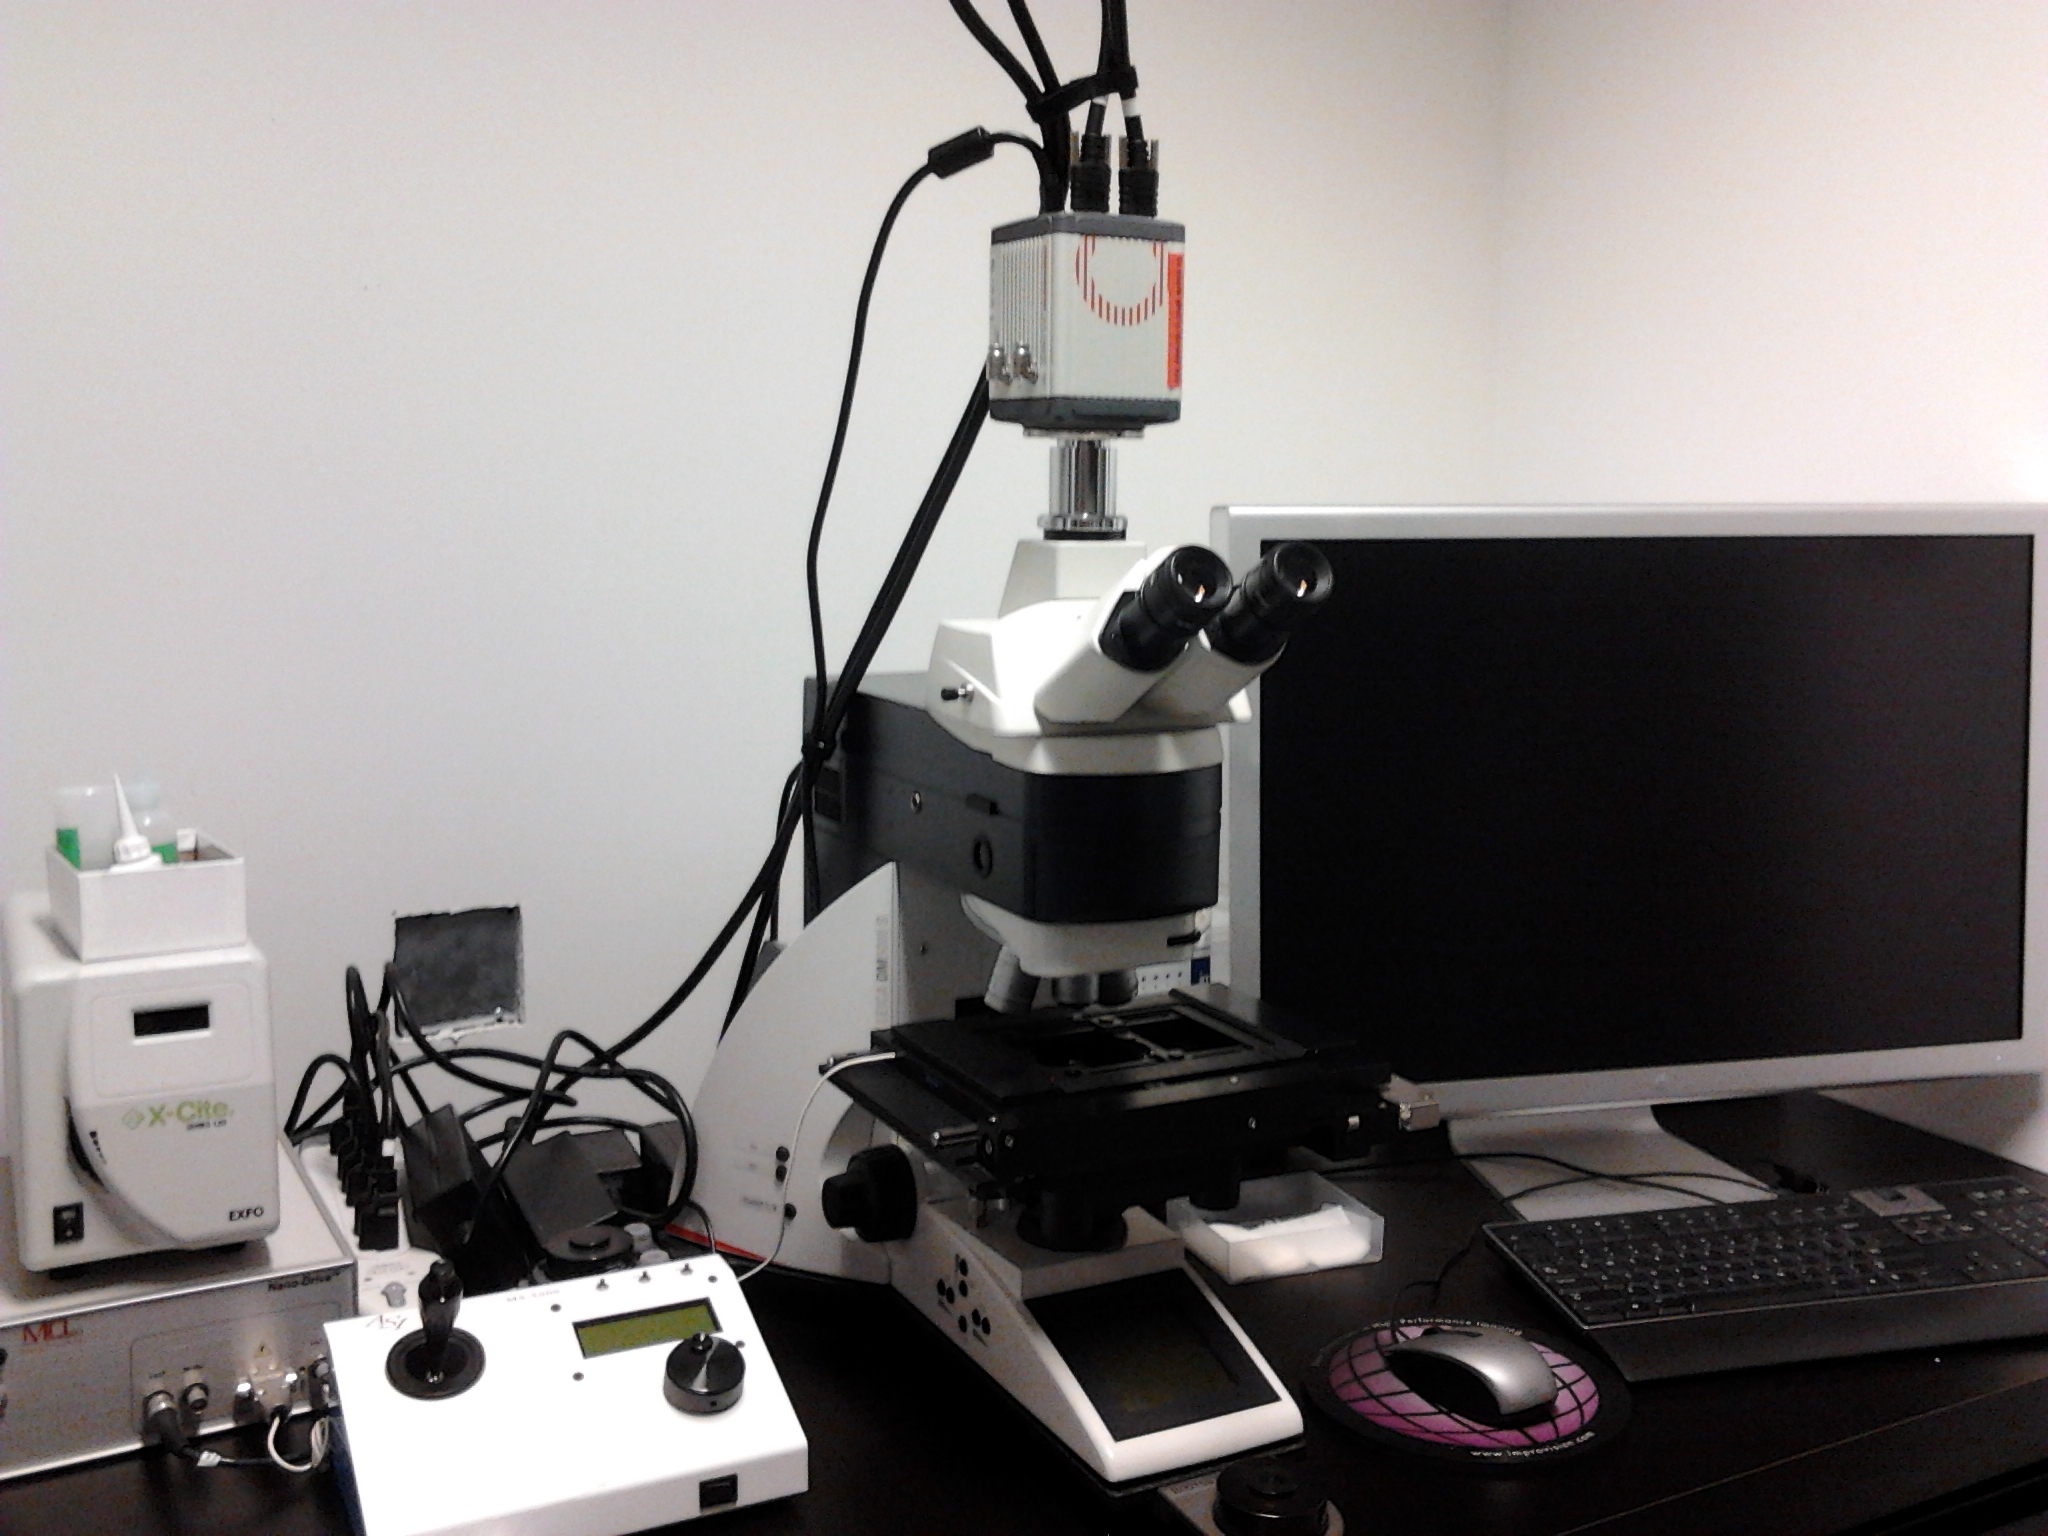 Image of the Leica DM 5000B microscope and accessory equipment